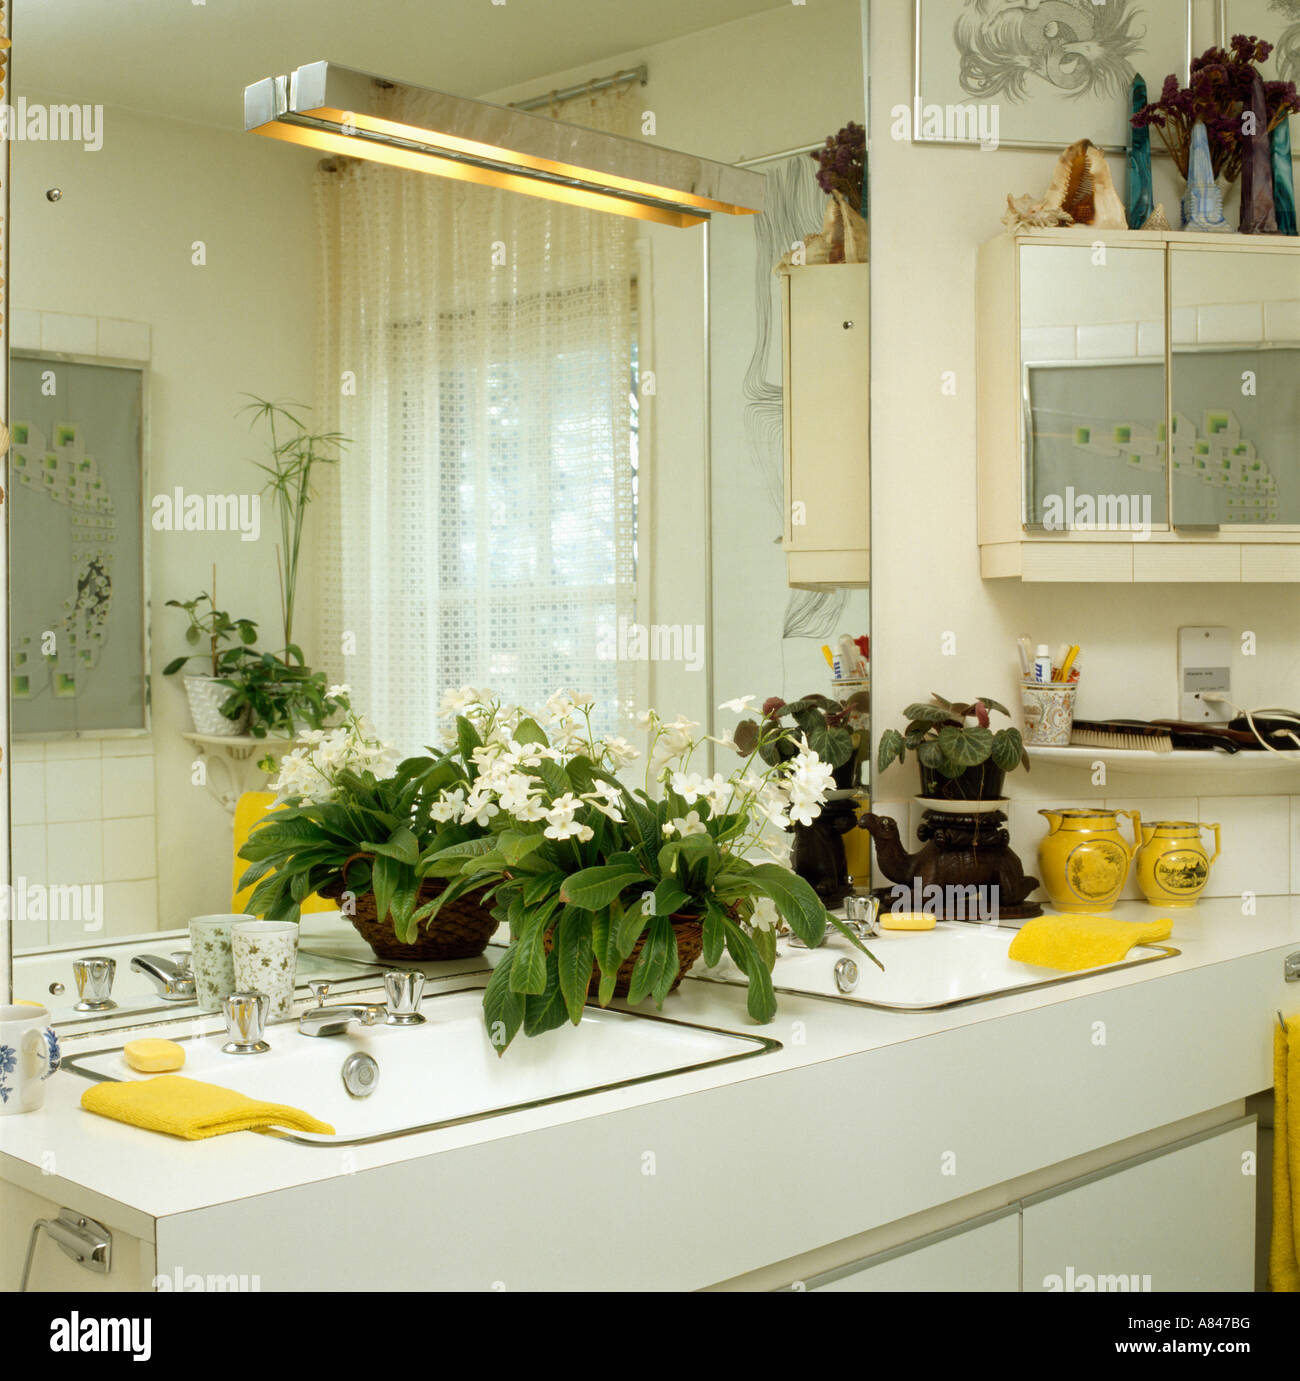 White flowering plant on white bathroom unit with double basins below large mirror Stock Photo